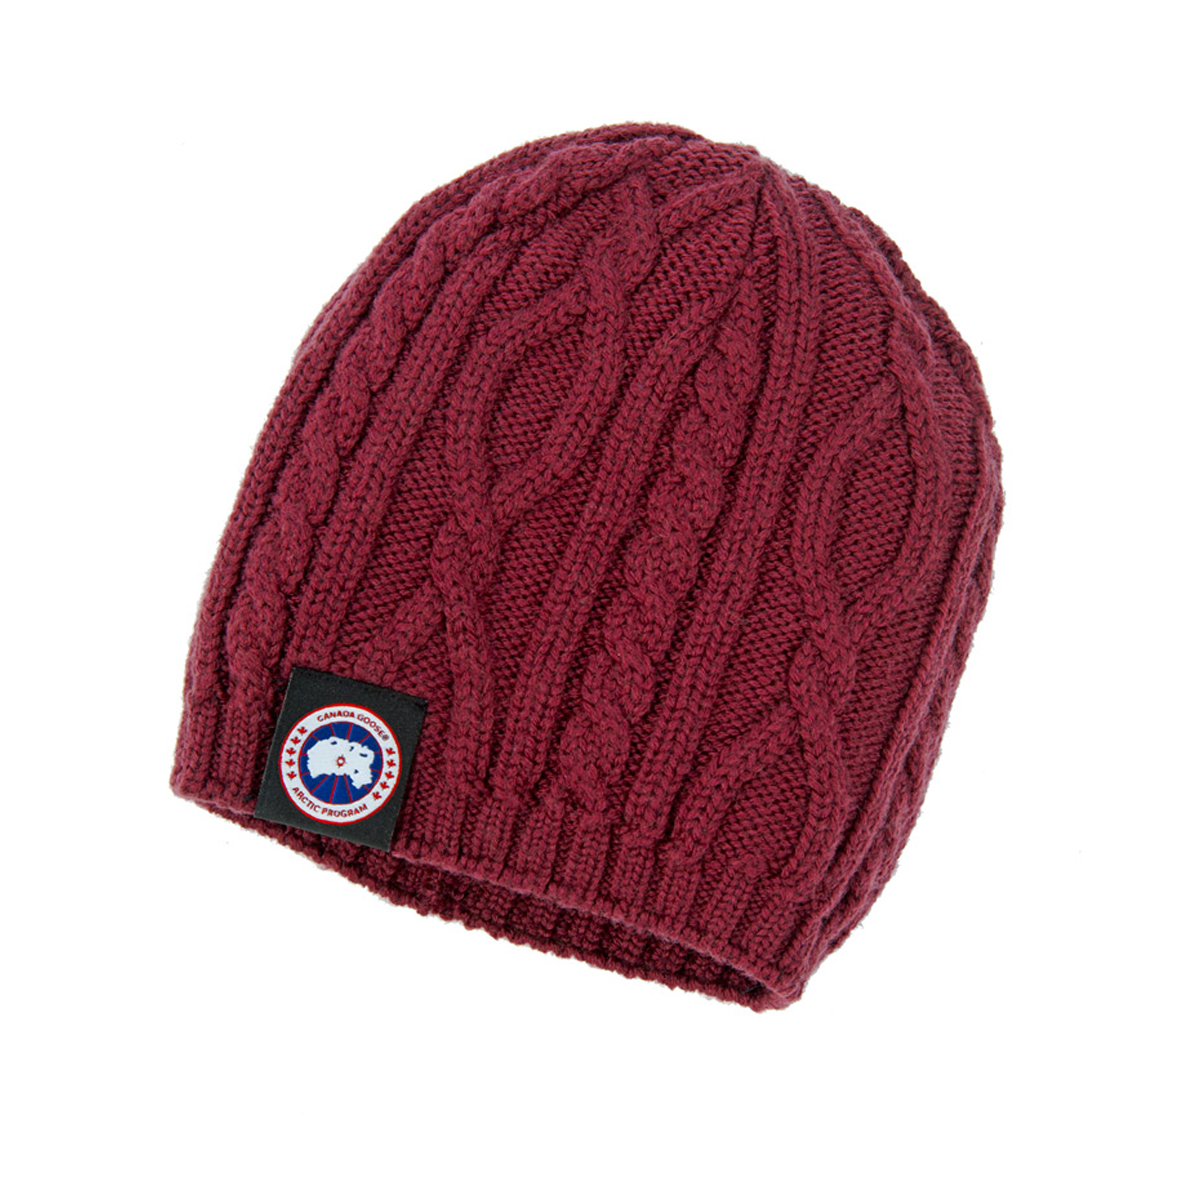 Canada Goose Unisex Merino Cable-Knit Beanie BERRY